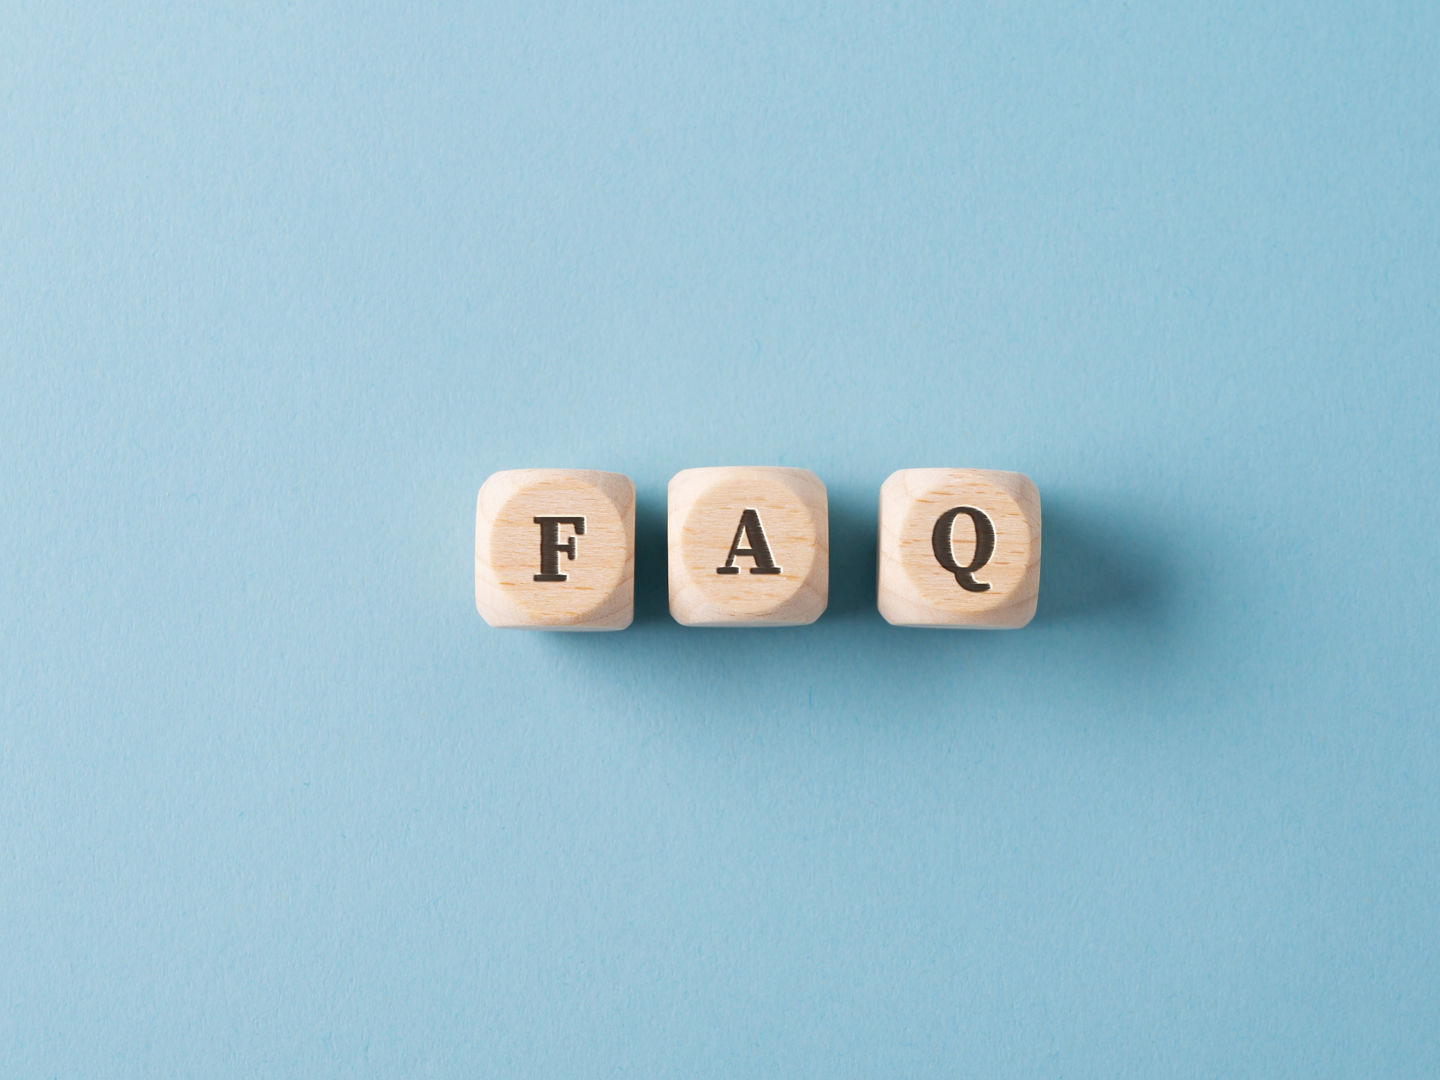 Three wooden dices spelling FAQ over light blue background.